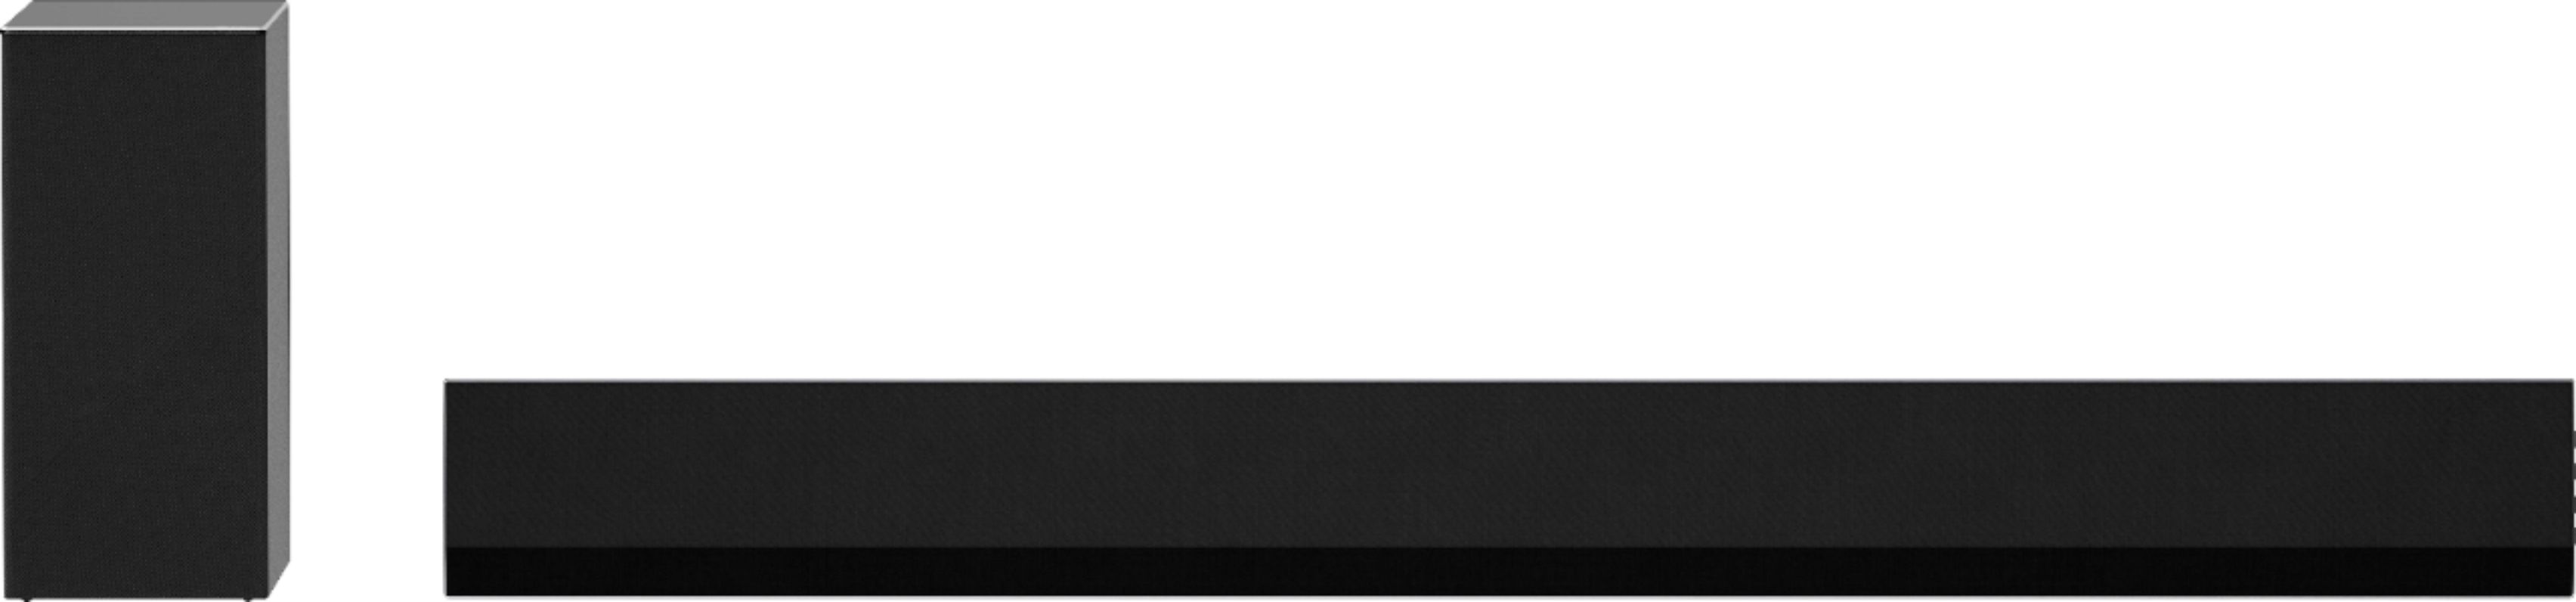 LG 3.1 Channel Soundbar with Wireless Subwoofer and DTS Virtual:X Black  S65Q - Best Buy